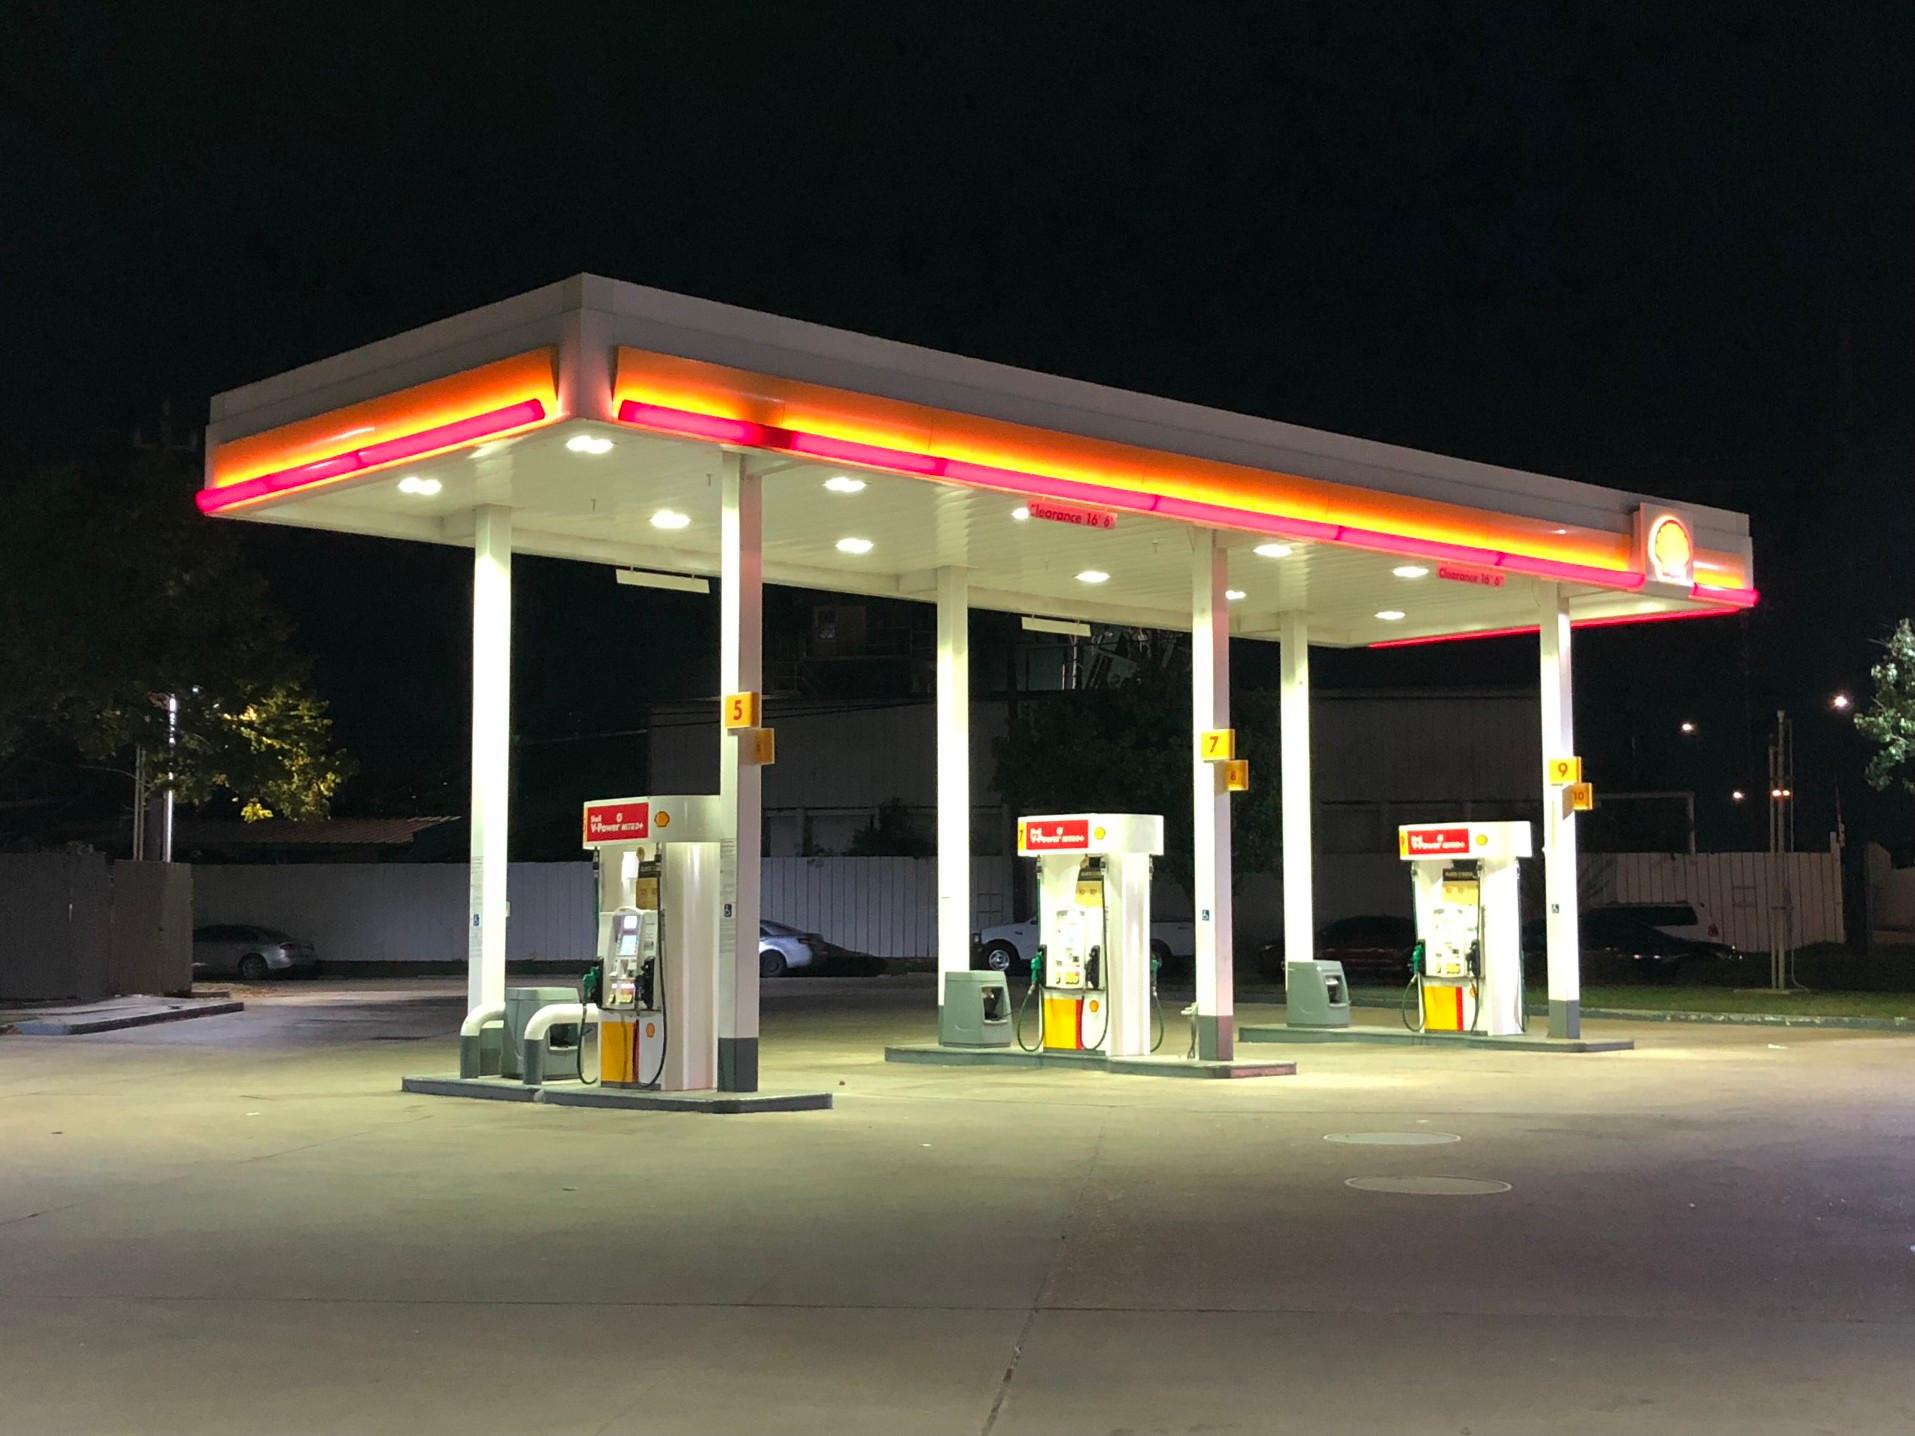 Gas stations have been an American staple for years, but how much longer will they survive?